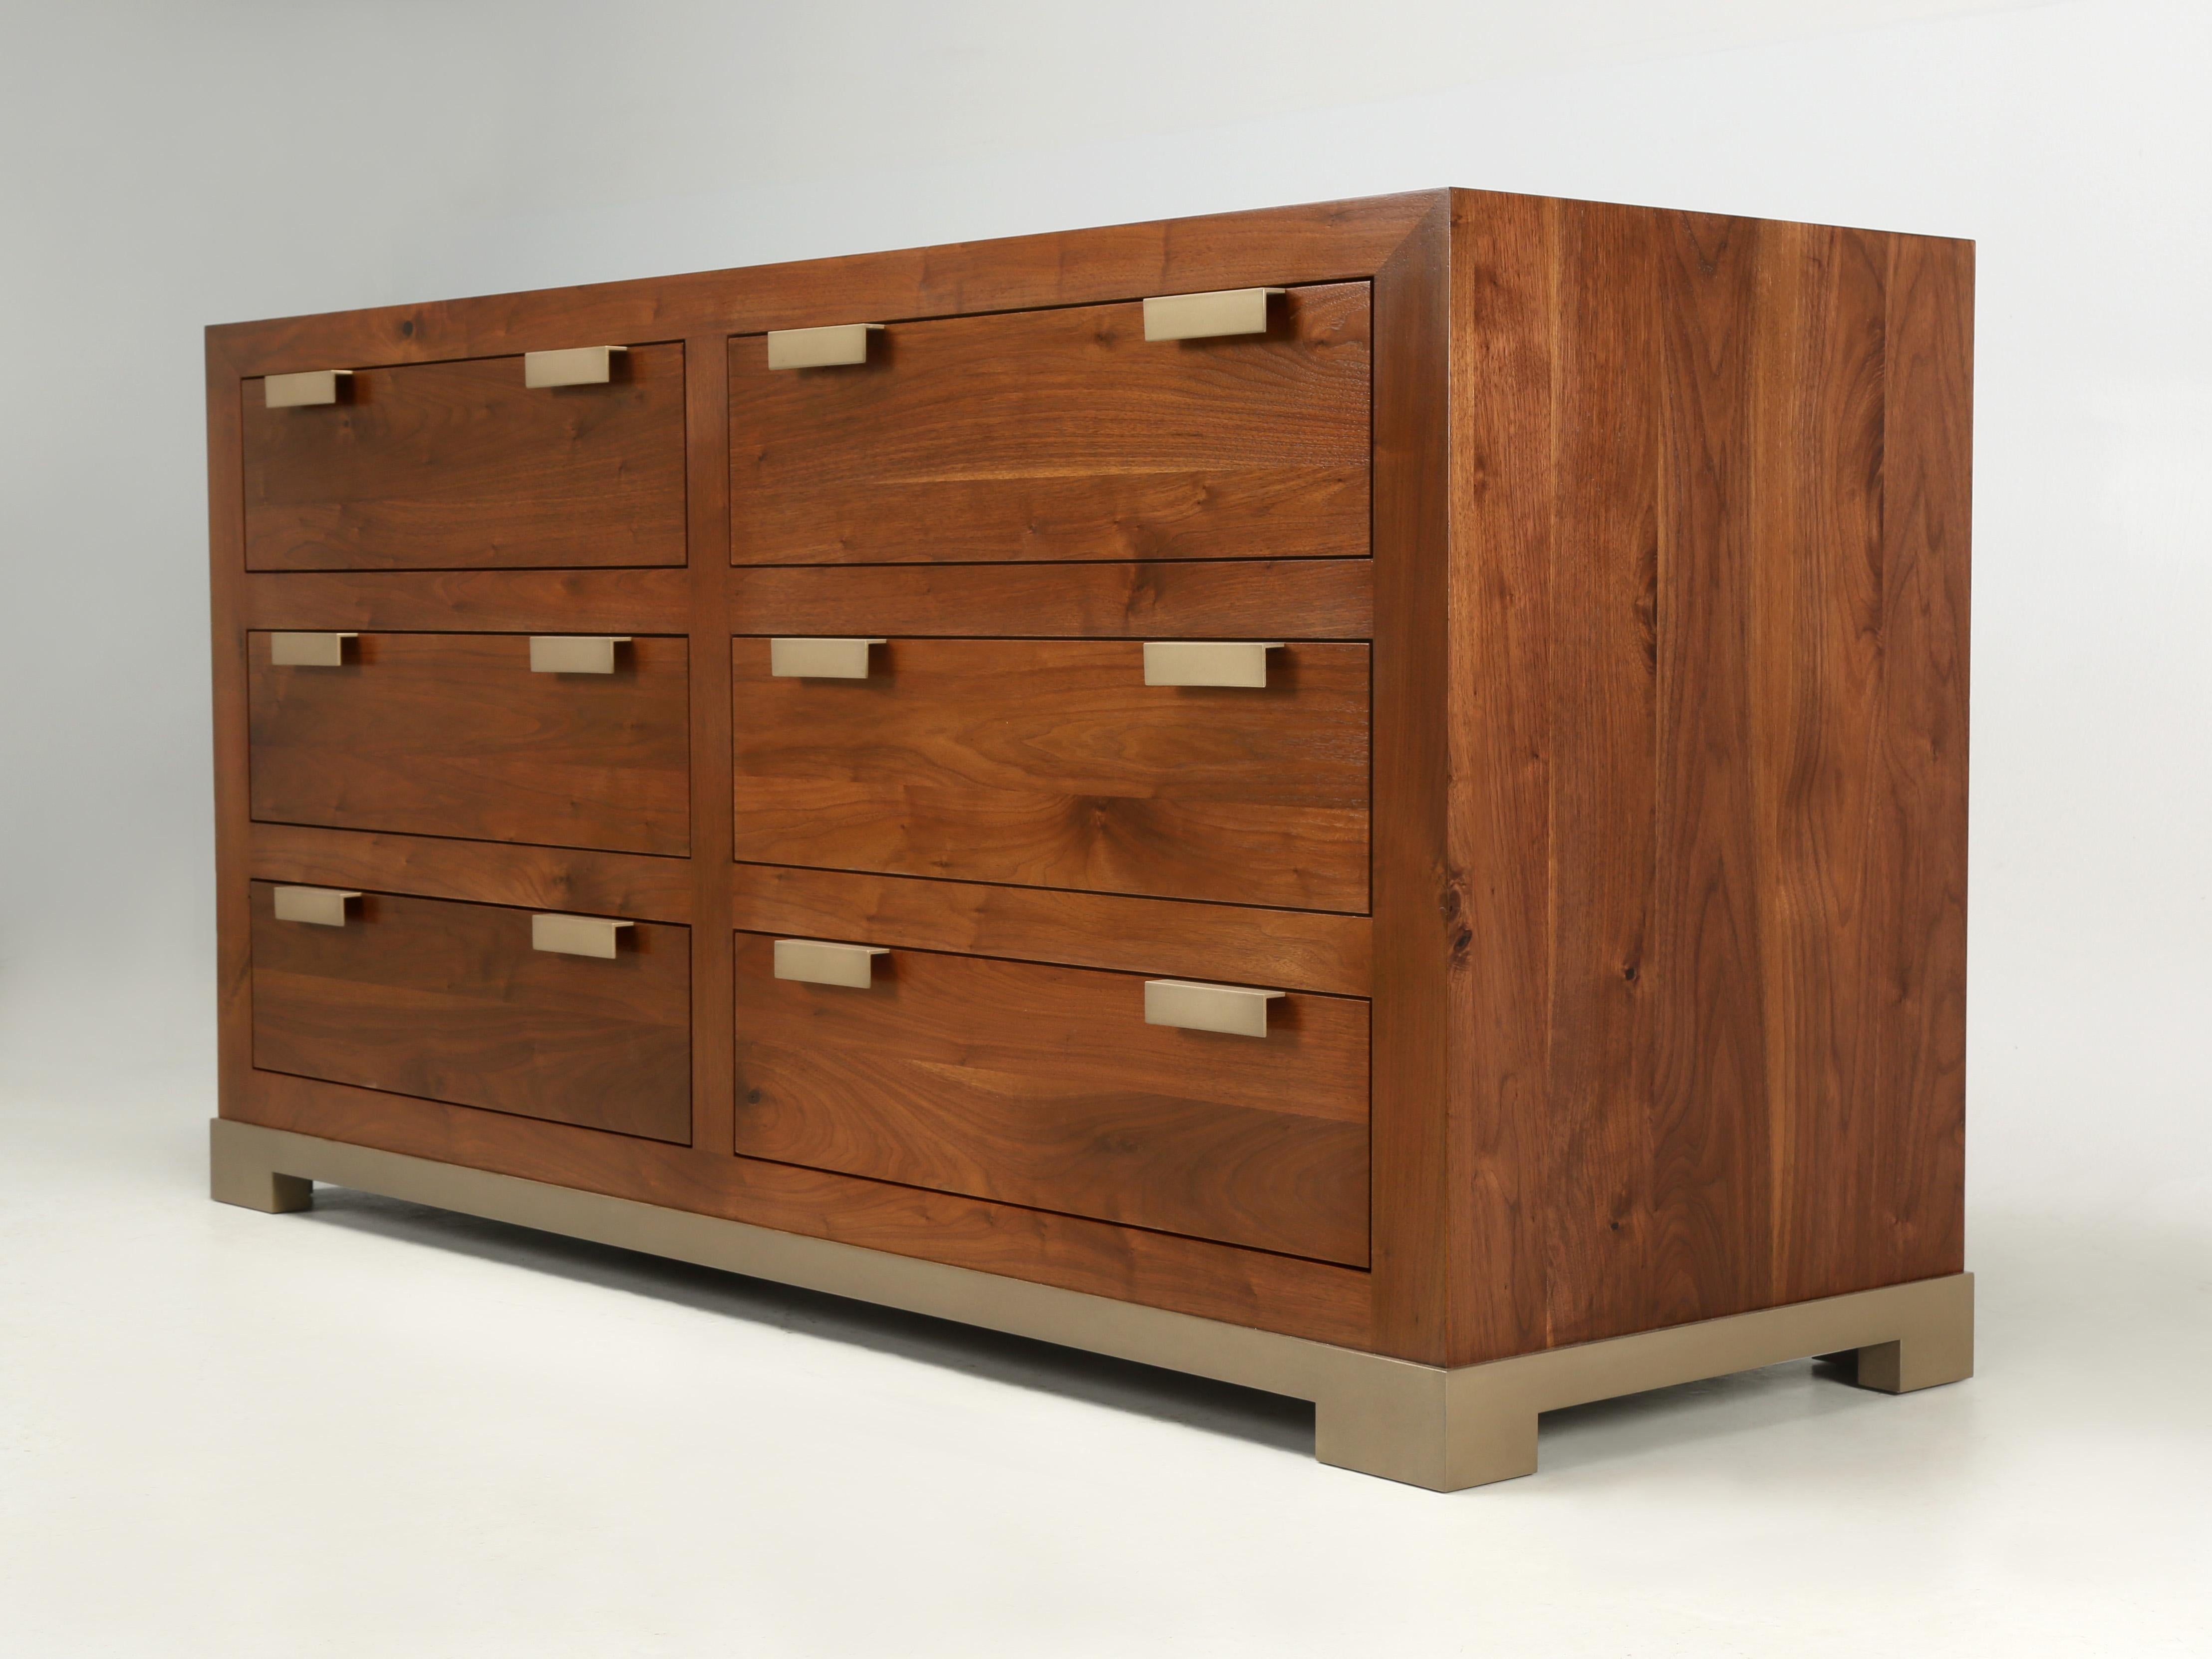 Hand-made to order in our Chicago Old Plank woodworking department, is this absolutely gorgeous chest of drawers or dresser if you please. Look carefully and you will notice that the grain of the thick rich solid walnut is continuous across the top